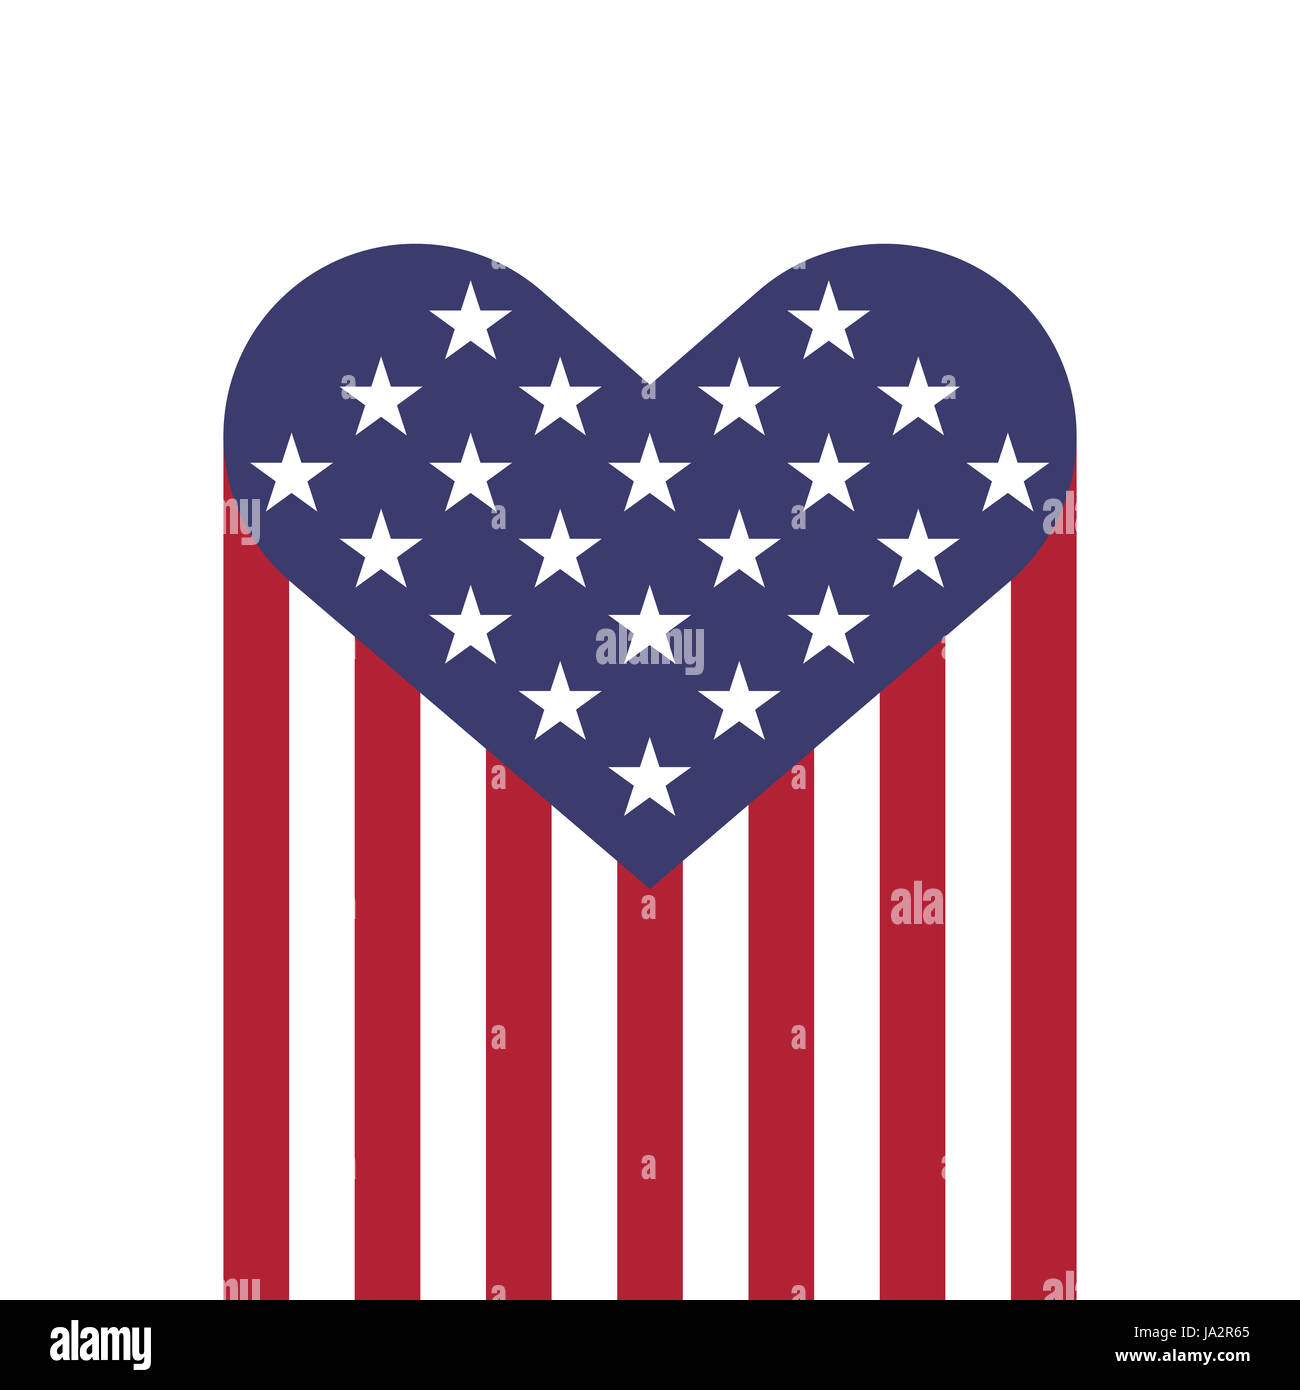 USA flag hearts shape vector illustration for Independence Day, Memorial Day or others Stock Photo